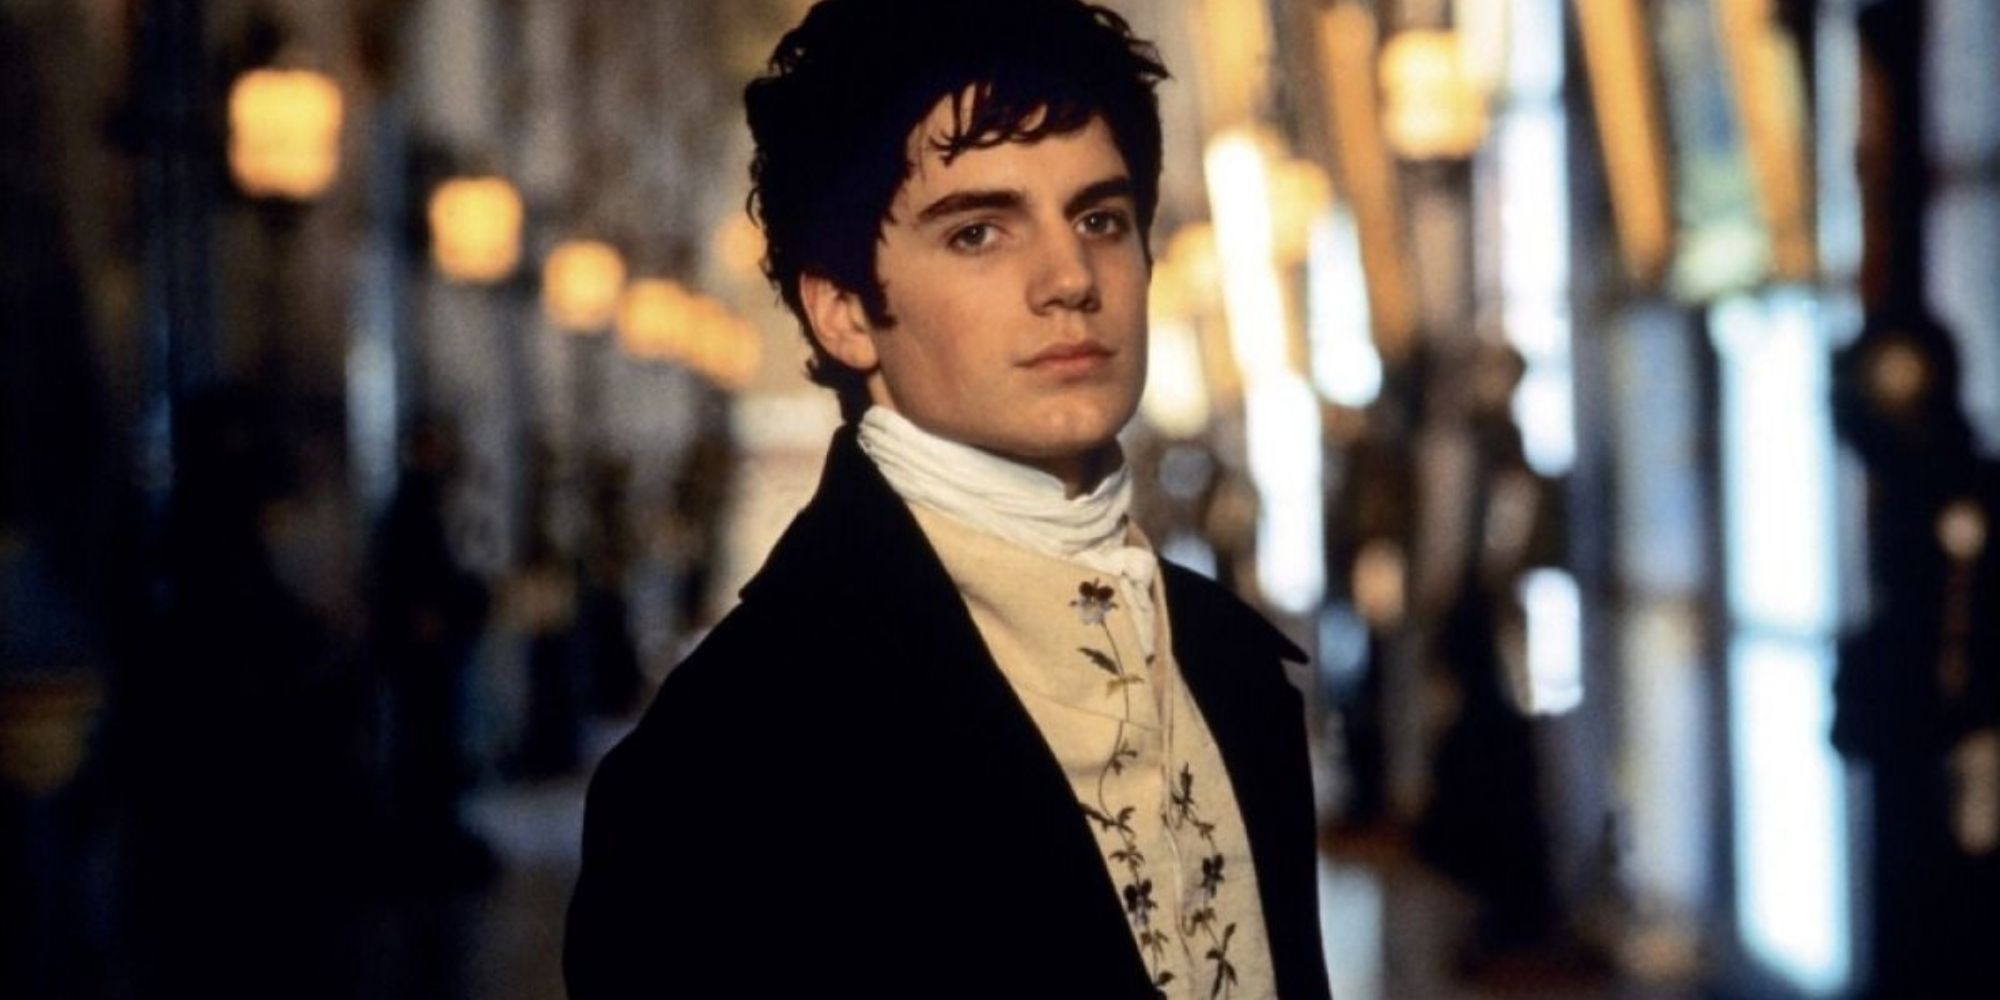 Henry Cavill as Albert Mondego in The Count Of Monte Cristo